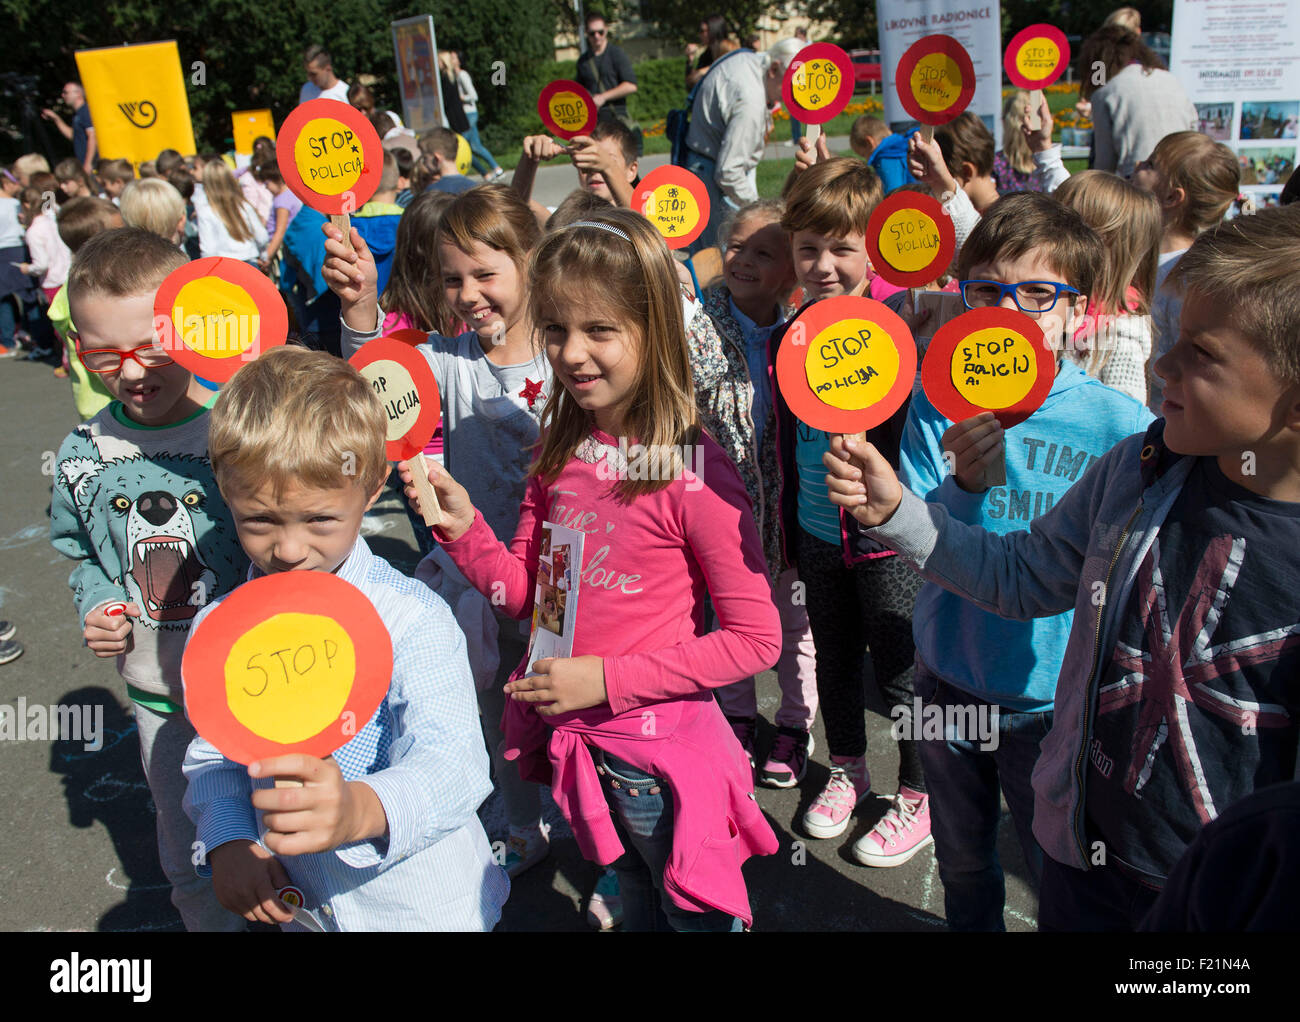 Zagreb, Croatia. 9th Sep, 2015. Kids participate in a traffic safety program event at Marshal Tito Square in Zagreb, capital of Croatia, Sept. 9, 2015. Local authorities and Police Department organized similar events in all major cities around Croatia to communicate important road safety messages to kids and drivers as new school year kicked-off here on Monday. © Miso Lisanin/Xinhua/Alamy Live News Stock Photo